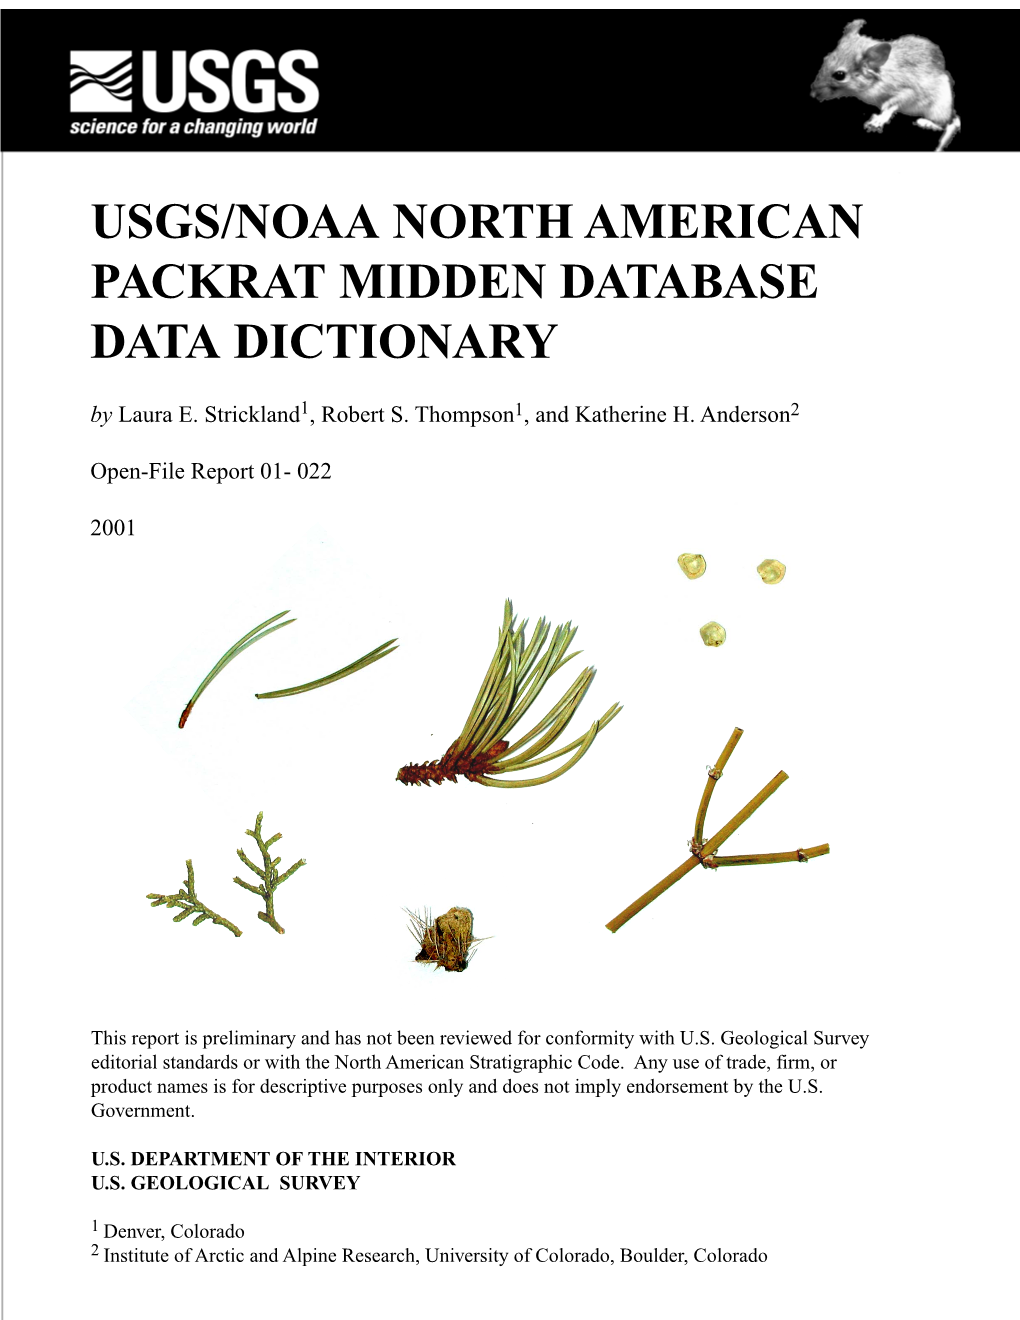 USGS/NOAA NORTH AMERICAN PACKRAT MIDDEN DATABASE DATA DICTIONARY by Laura E